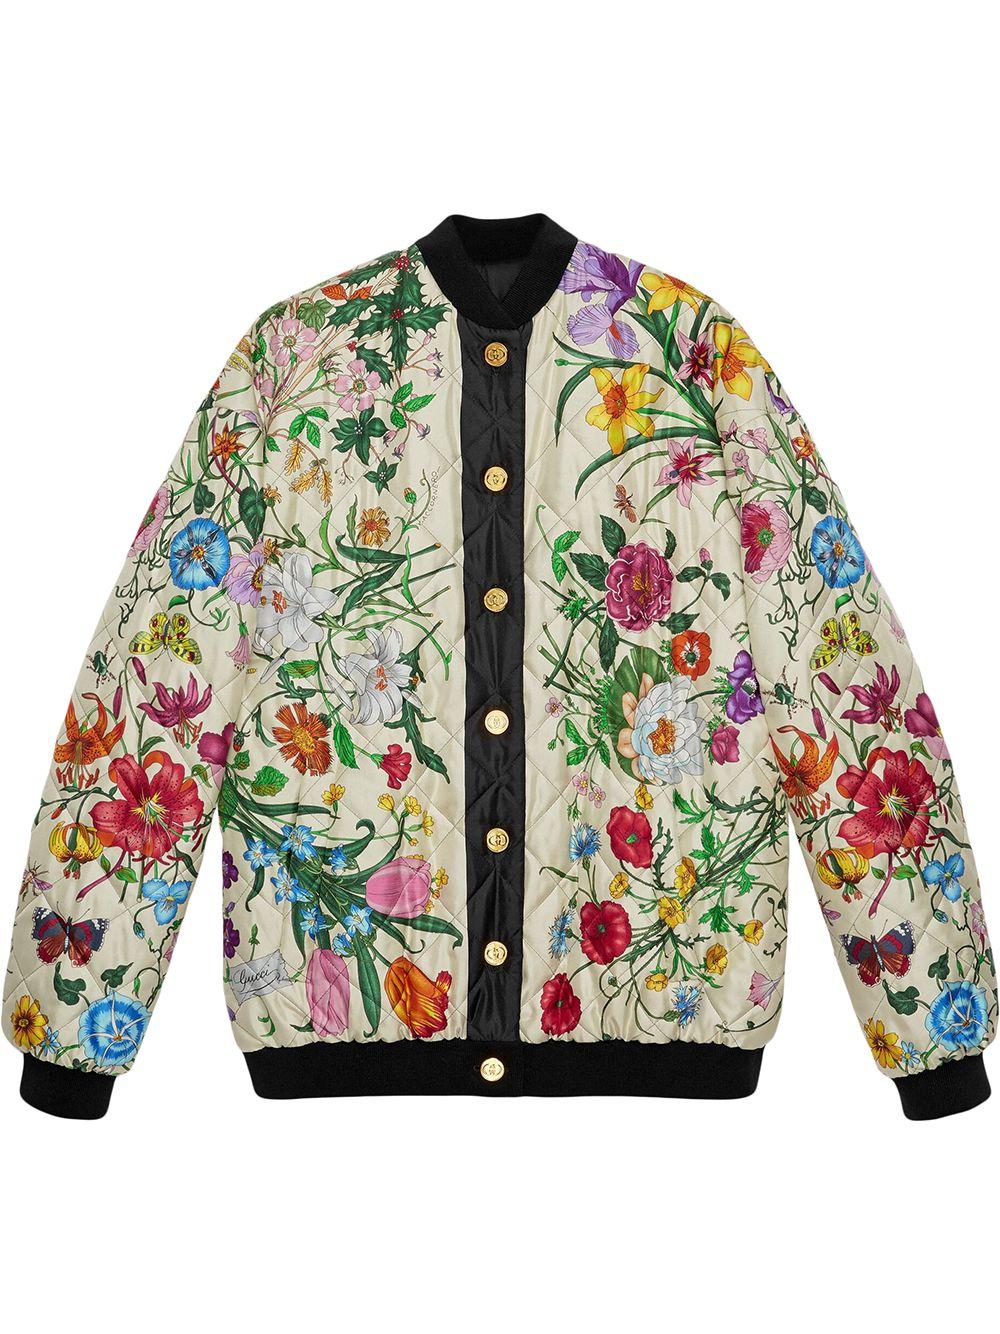 Gucci Disney X Reversible Bomber Jacket in White - Lyst